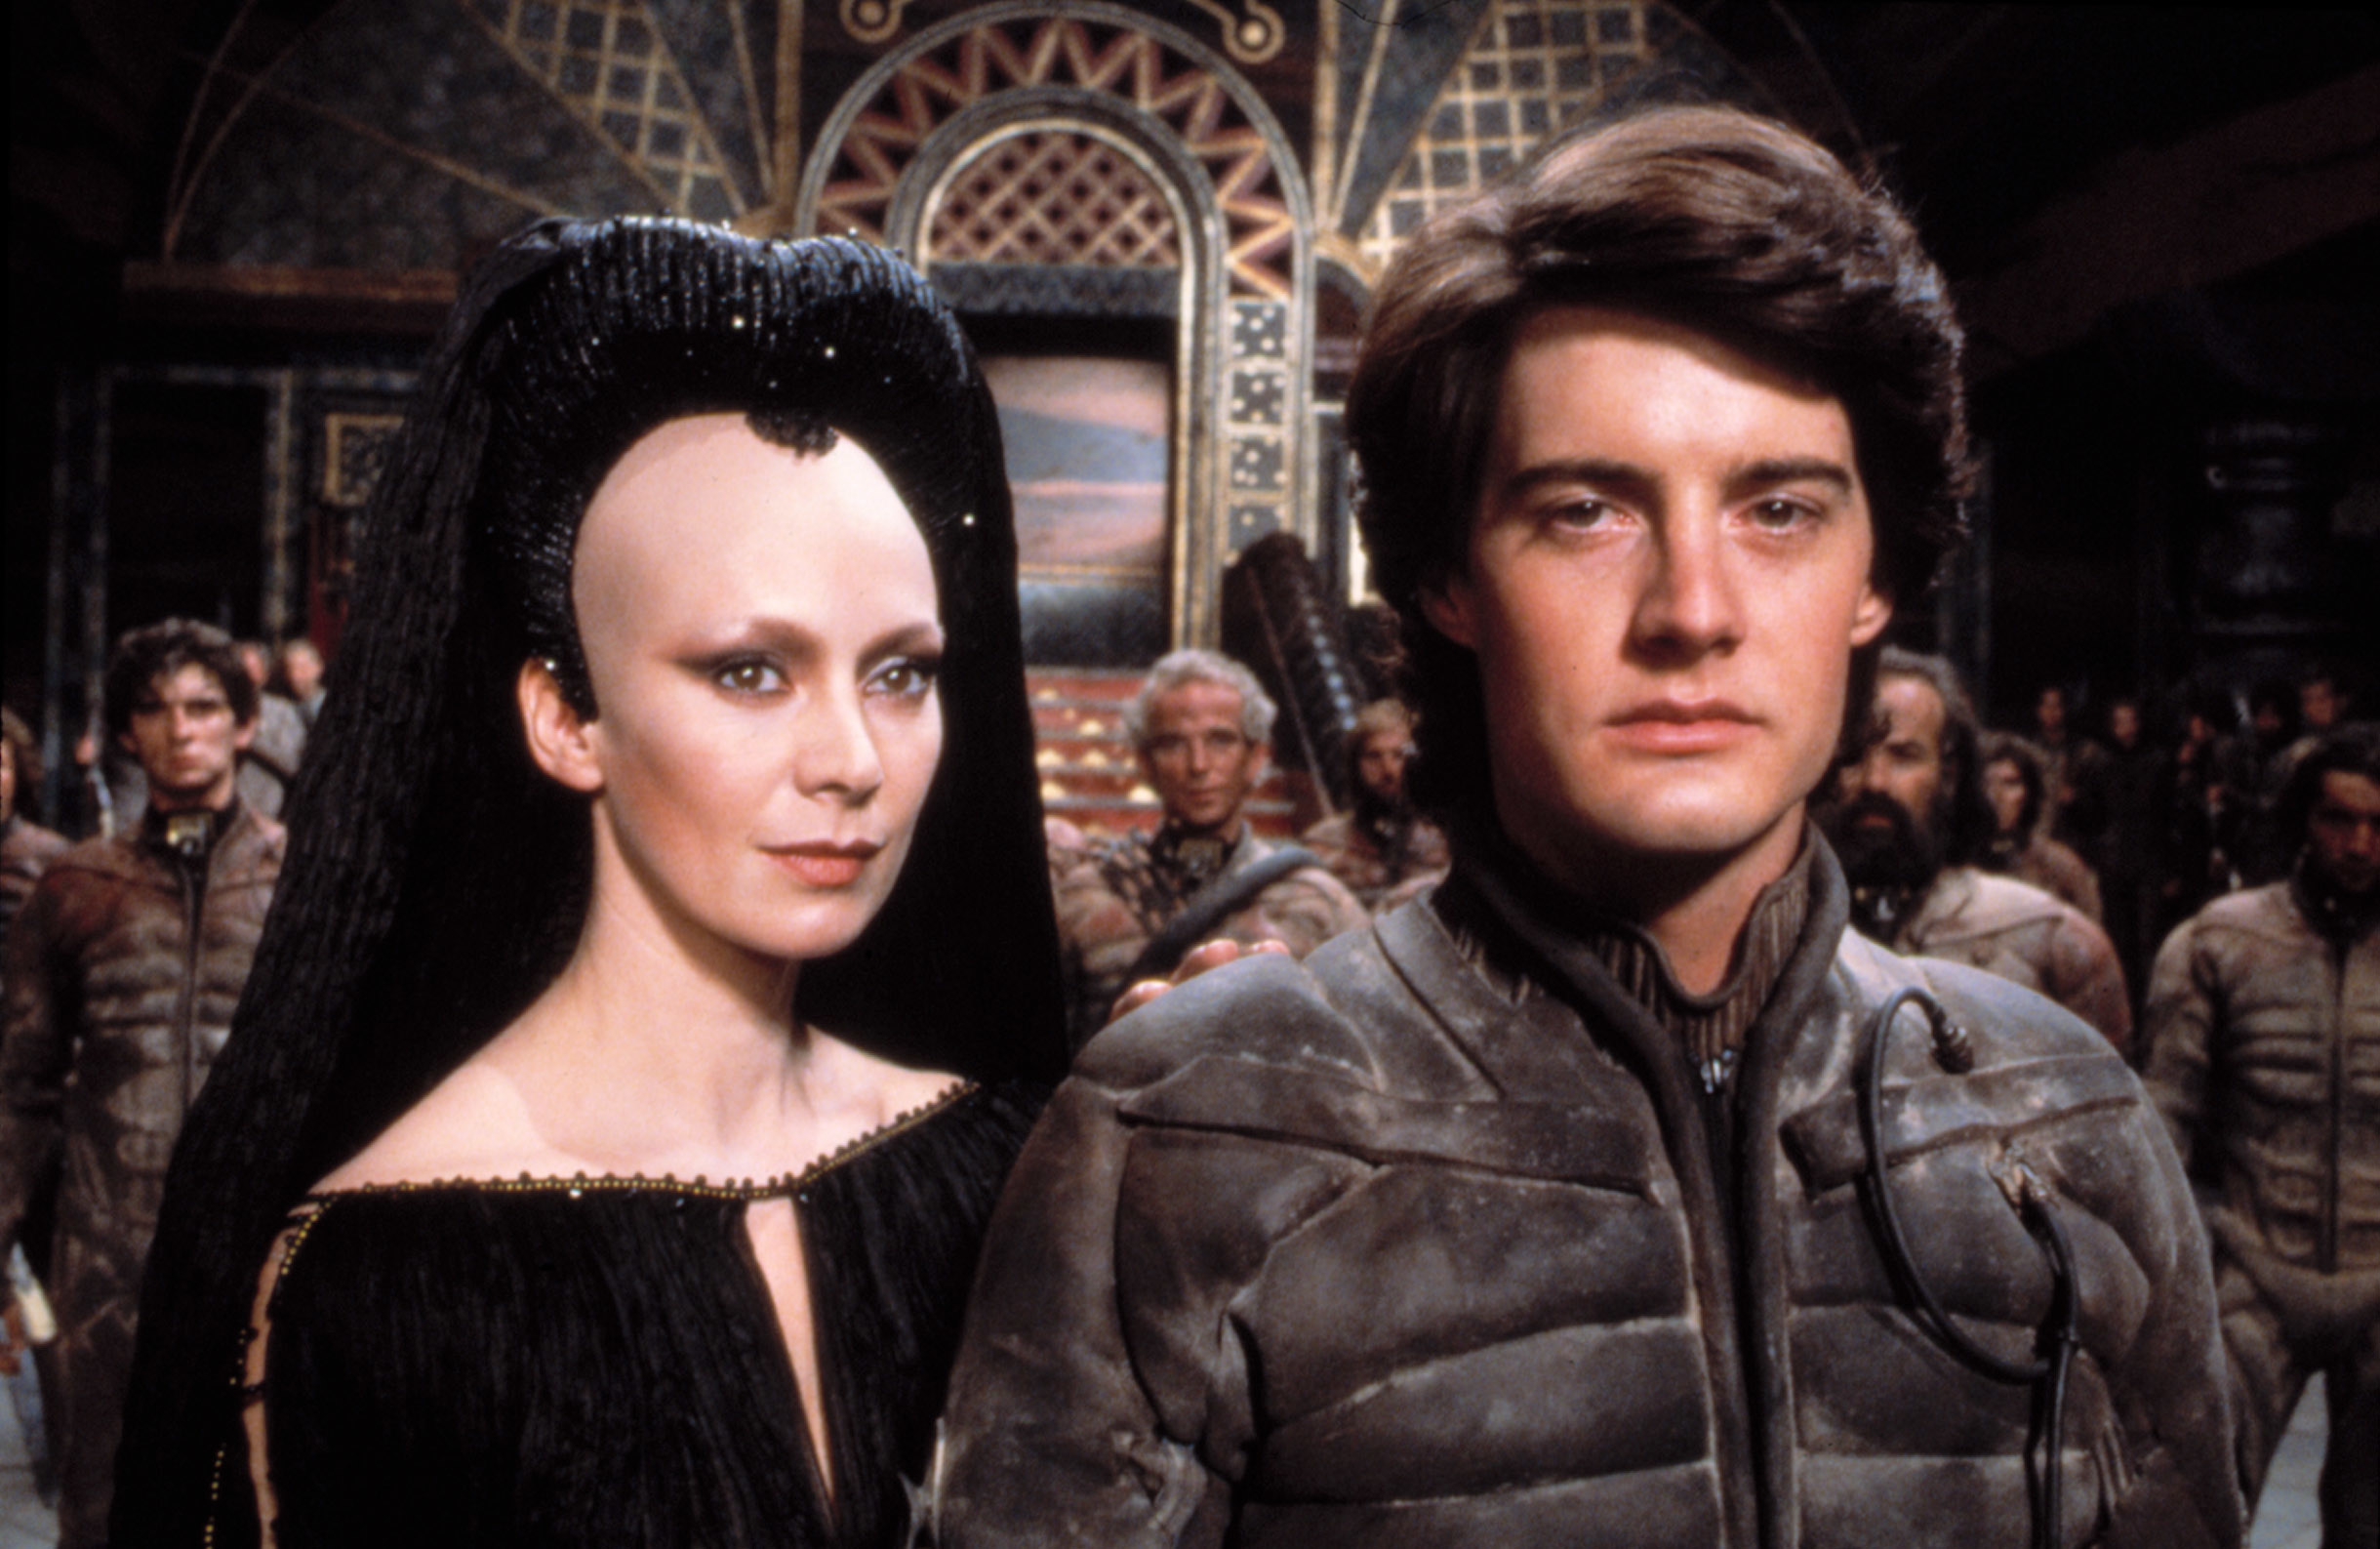 The image shows characters Lady Jessica in ornate attire and Paul Atreides in a stillsuit from the 1984 film Dune